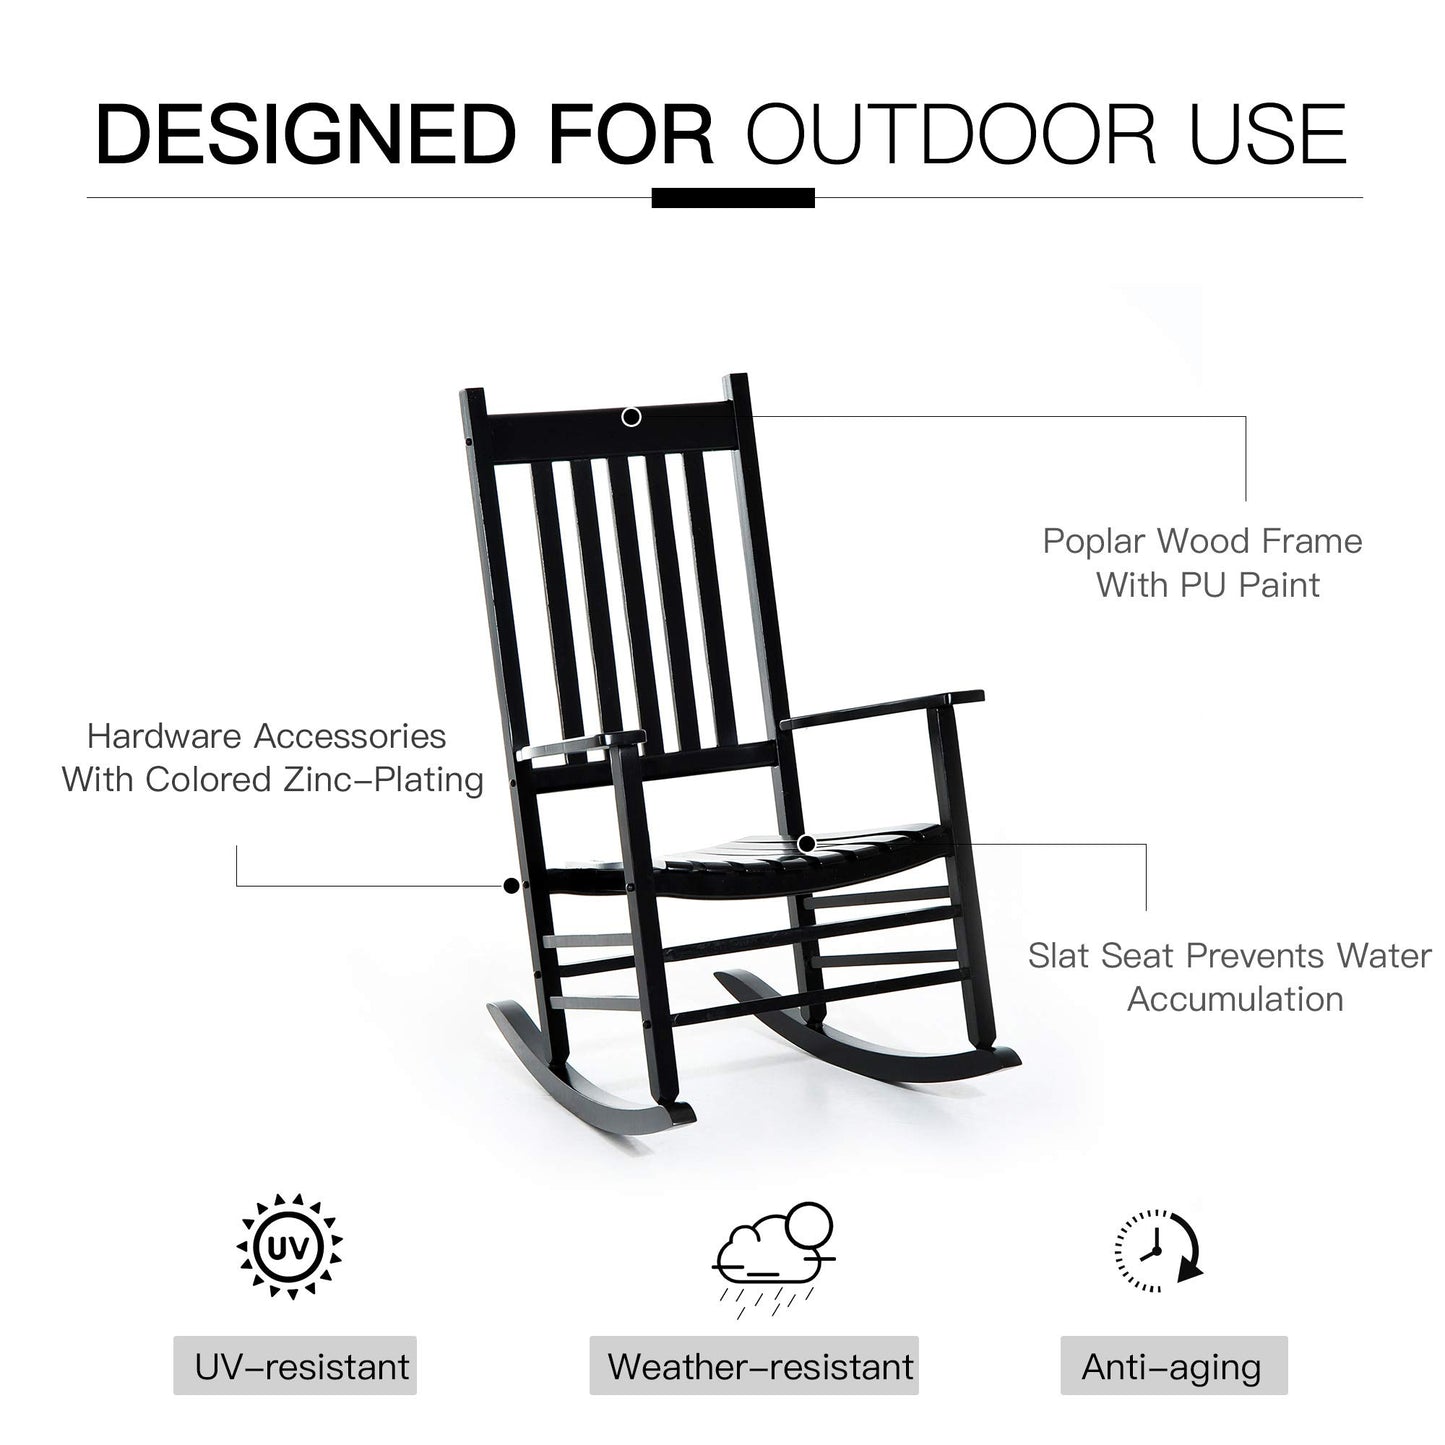 Outsunny Outdoor Rocking Chair, Wooden Rocking Patio Chairs with Rustic High Back, Slatted Seat and Backrest for Indoor, Backyard, Garden, Black